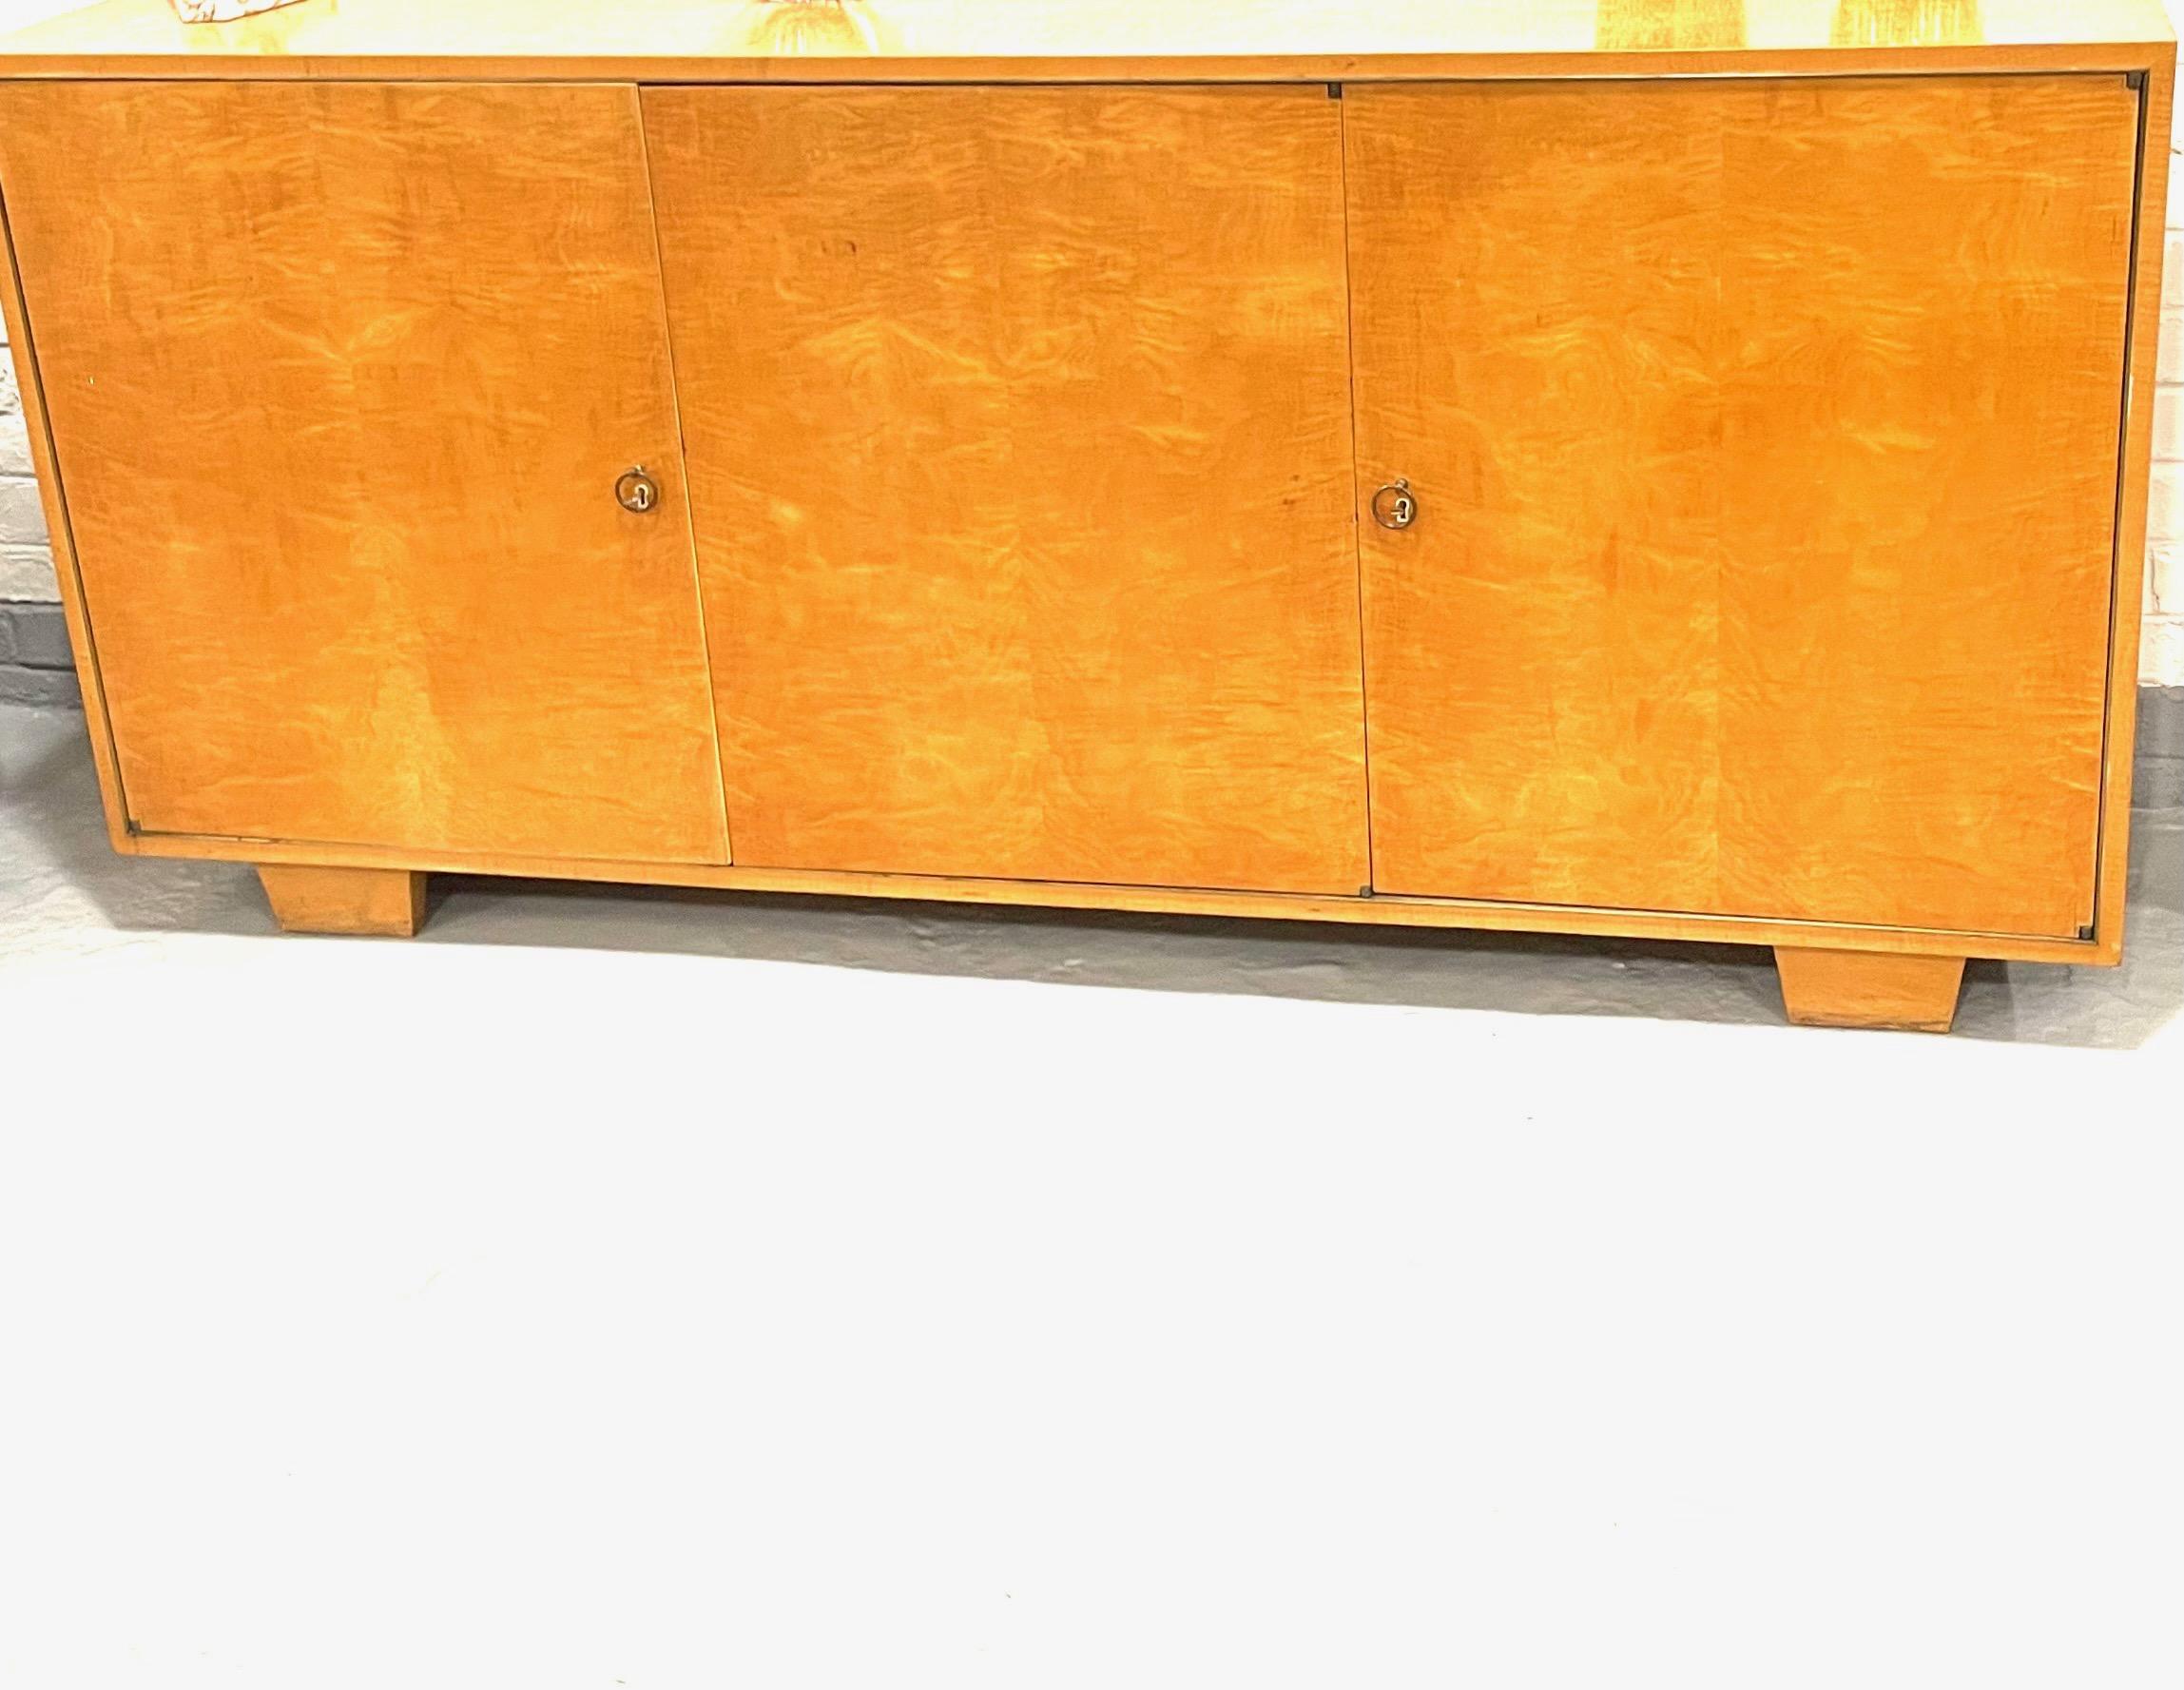 Art Deco Sycomore Sideboard With Multiple Drawers Attributed to De Coene-Belgium 1